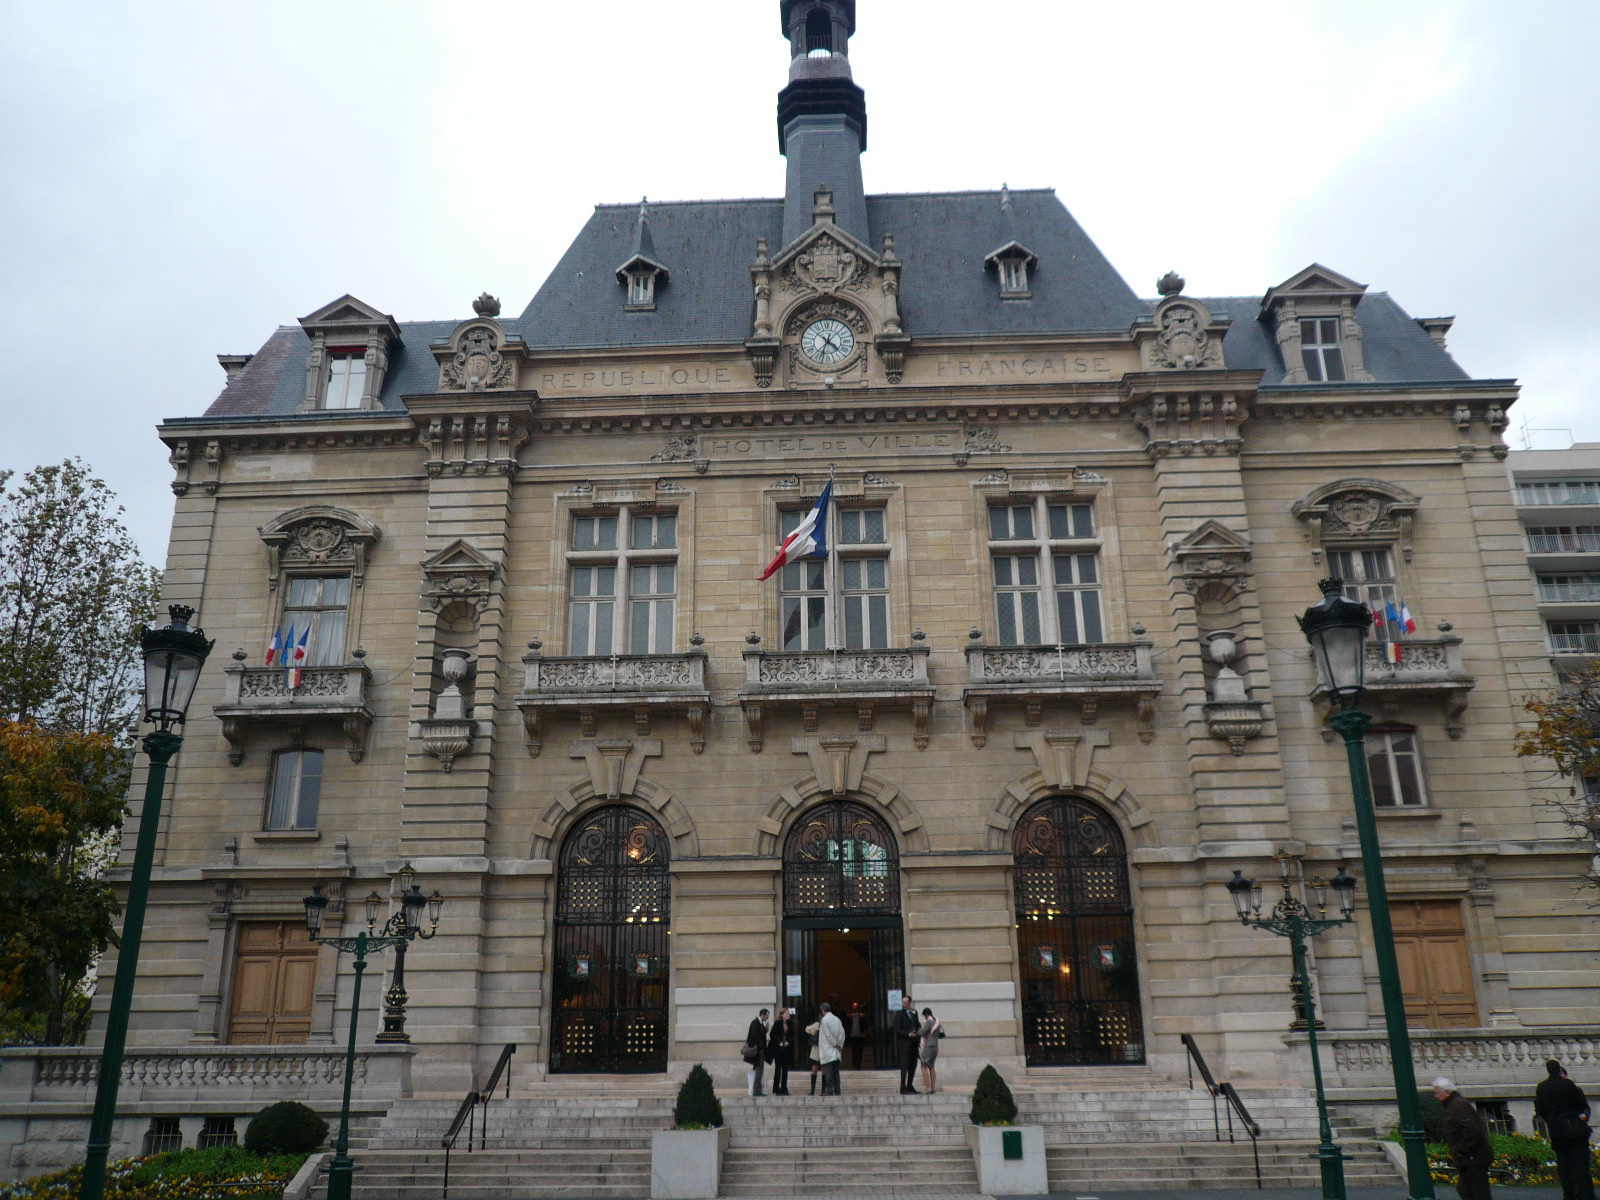 http://fr.academic.ru/pictures/frwiki/80/P1080870_Mairie_Colombes.JPG